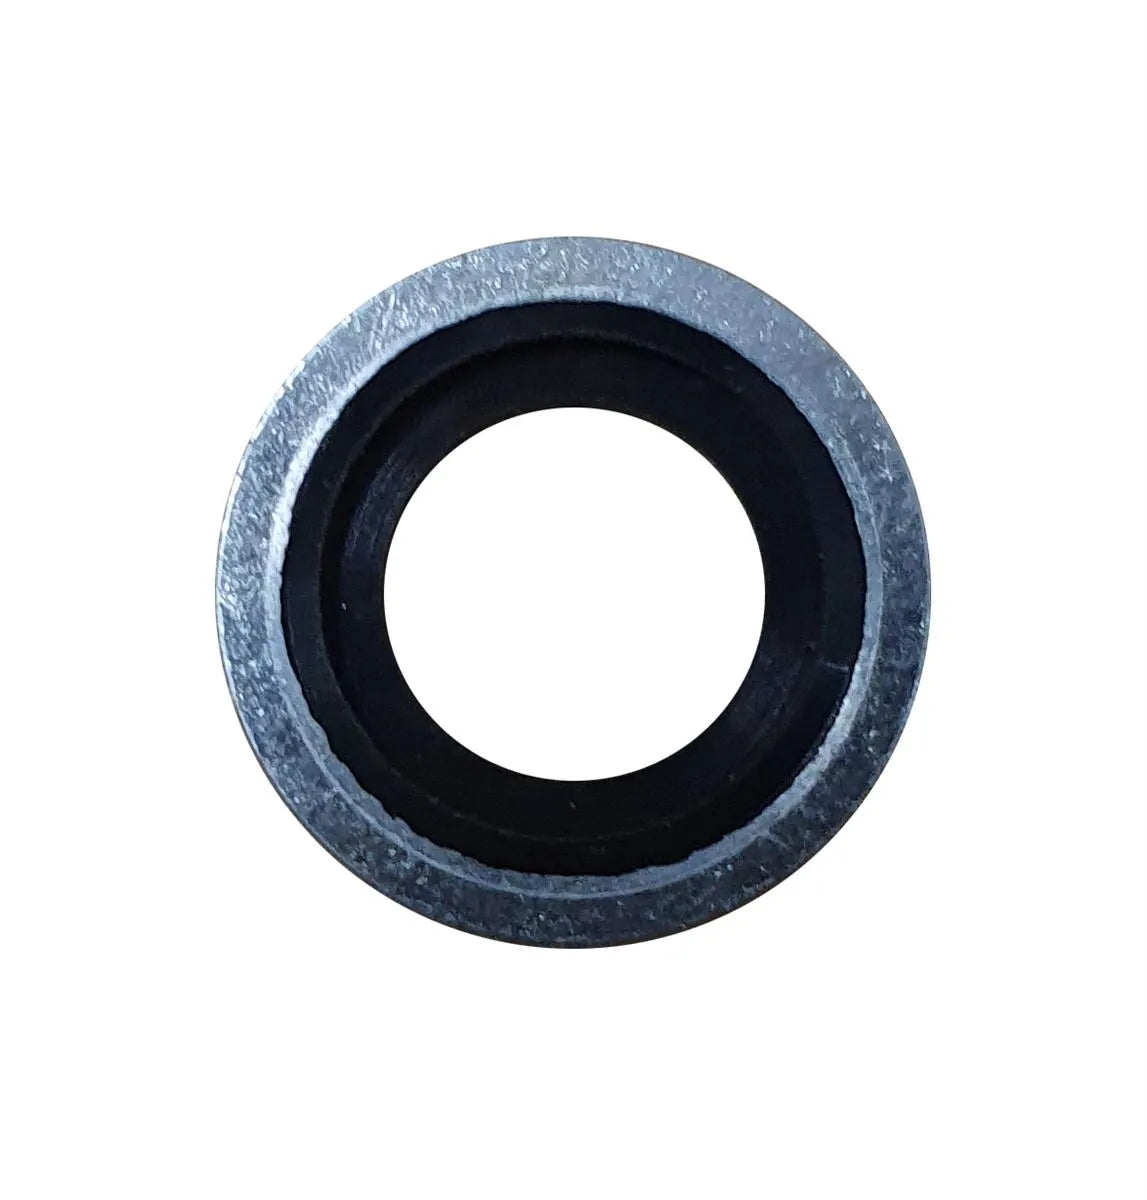 GAS007 - CO2 WASHER METAL